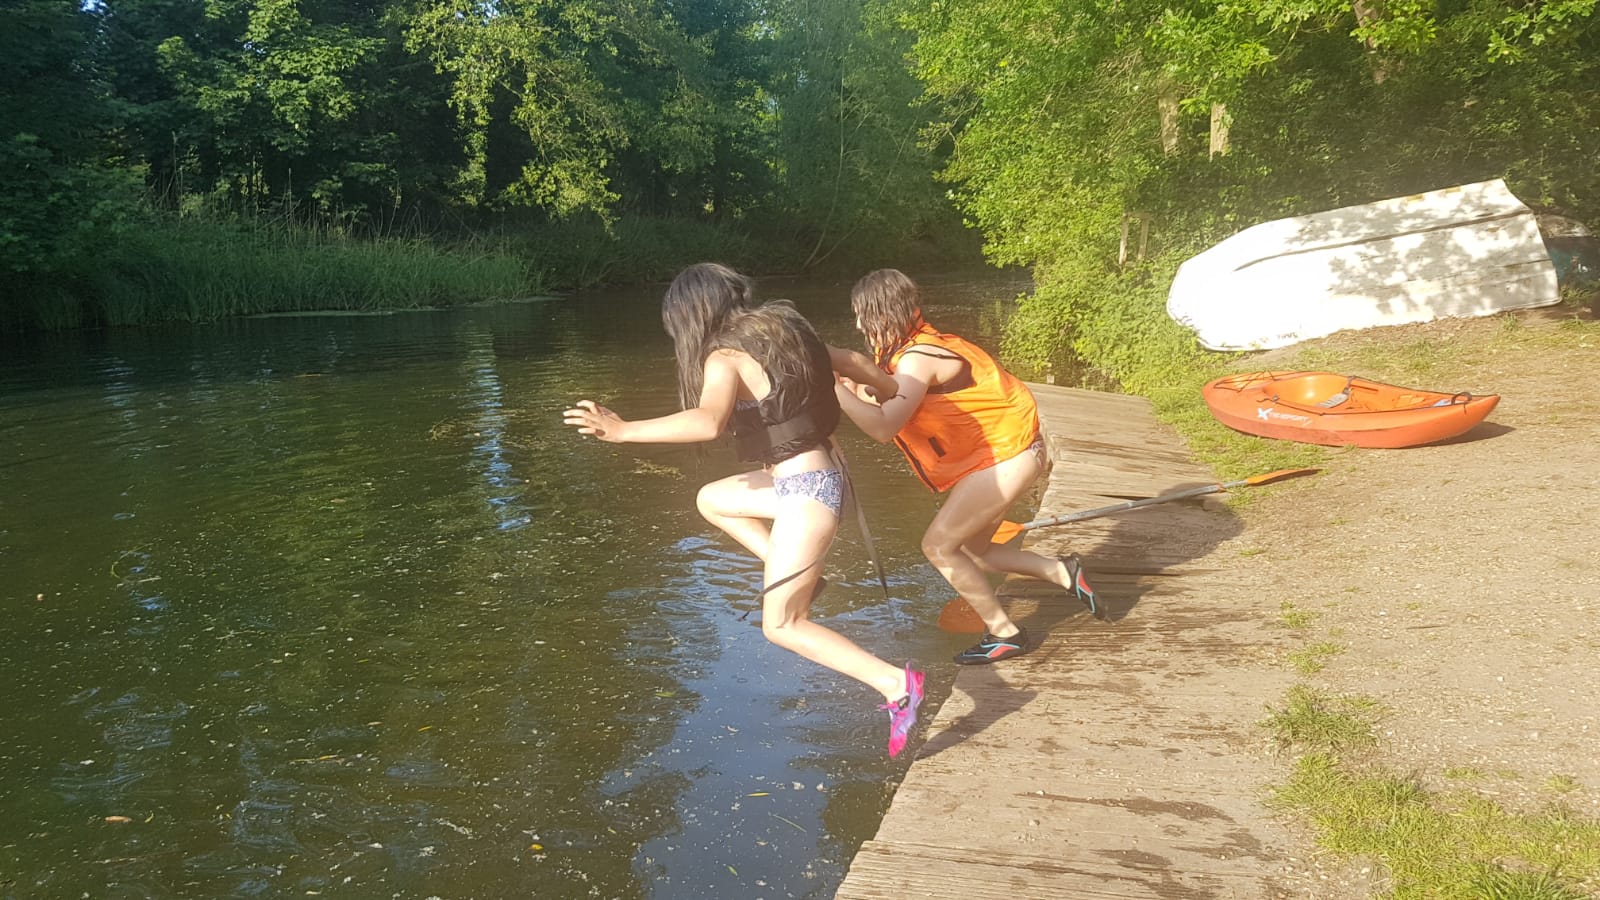 Children jumping into the river with lifejackets on